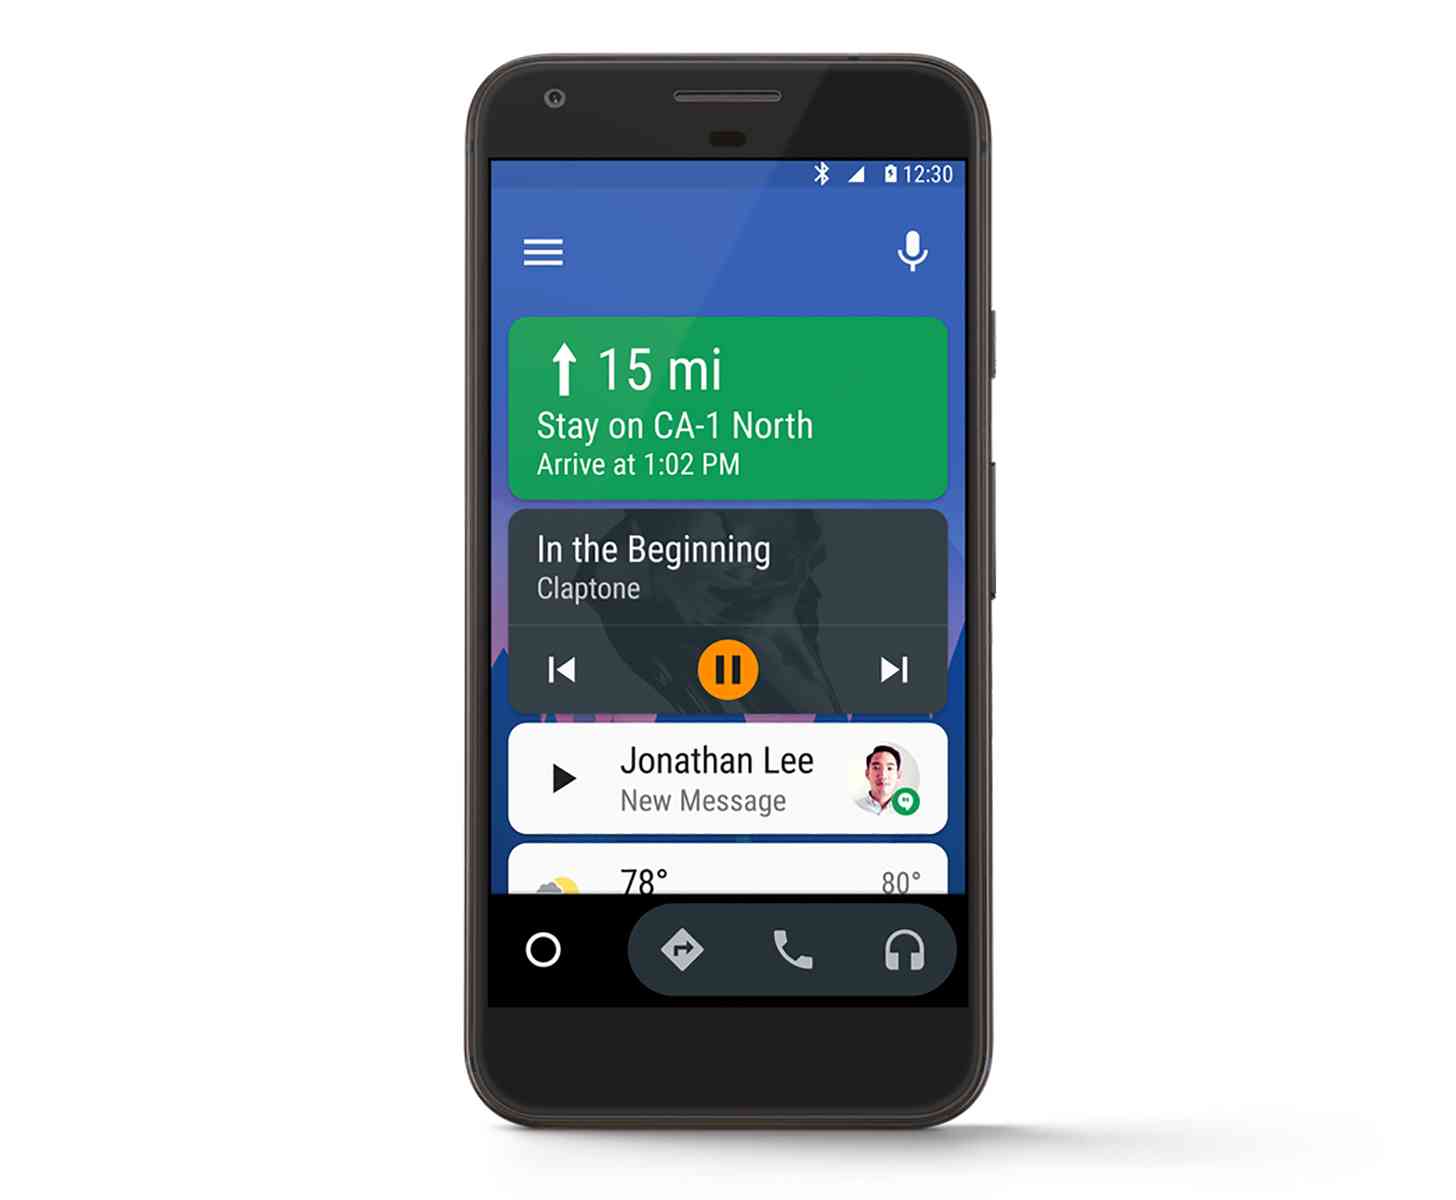 Android Auto update on your phone